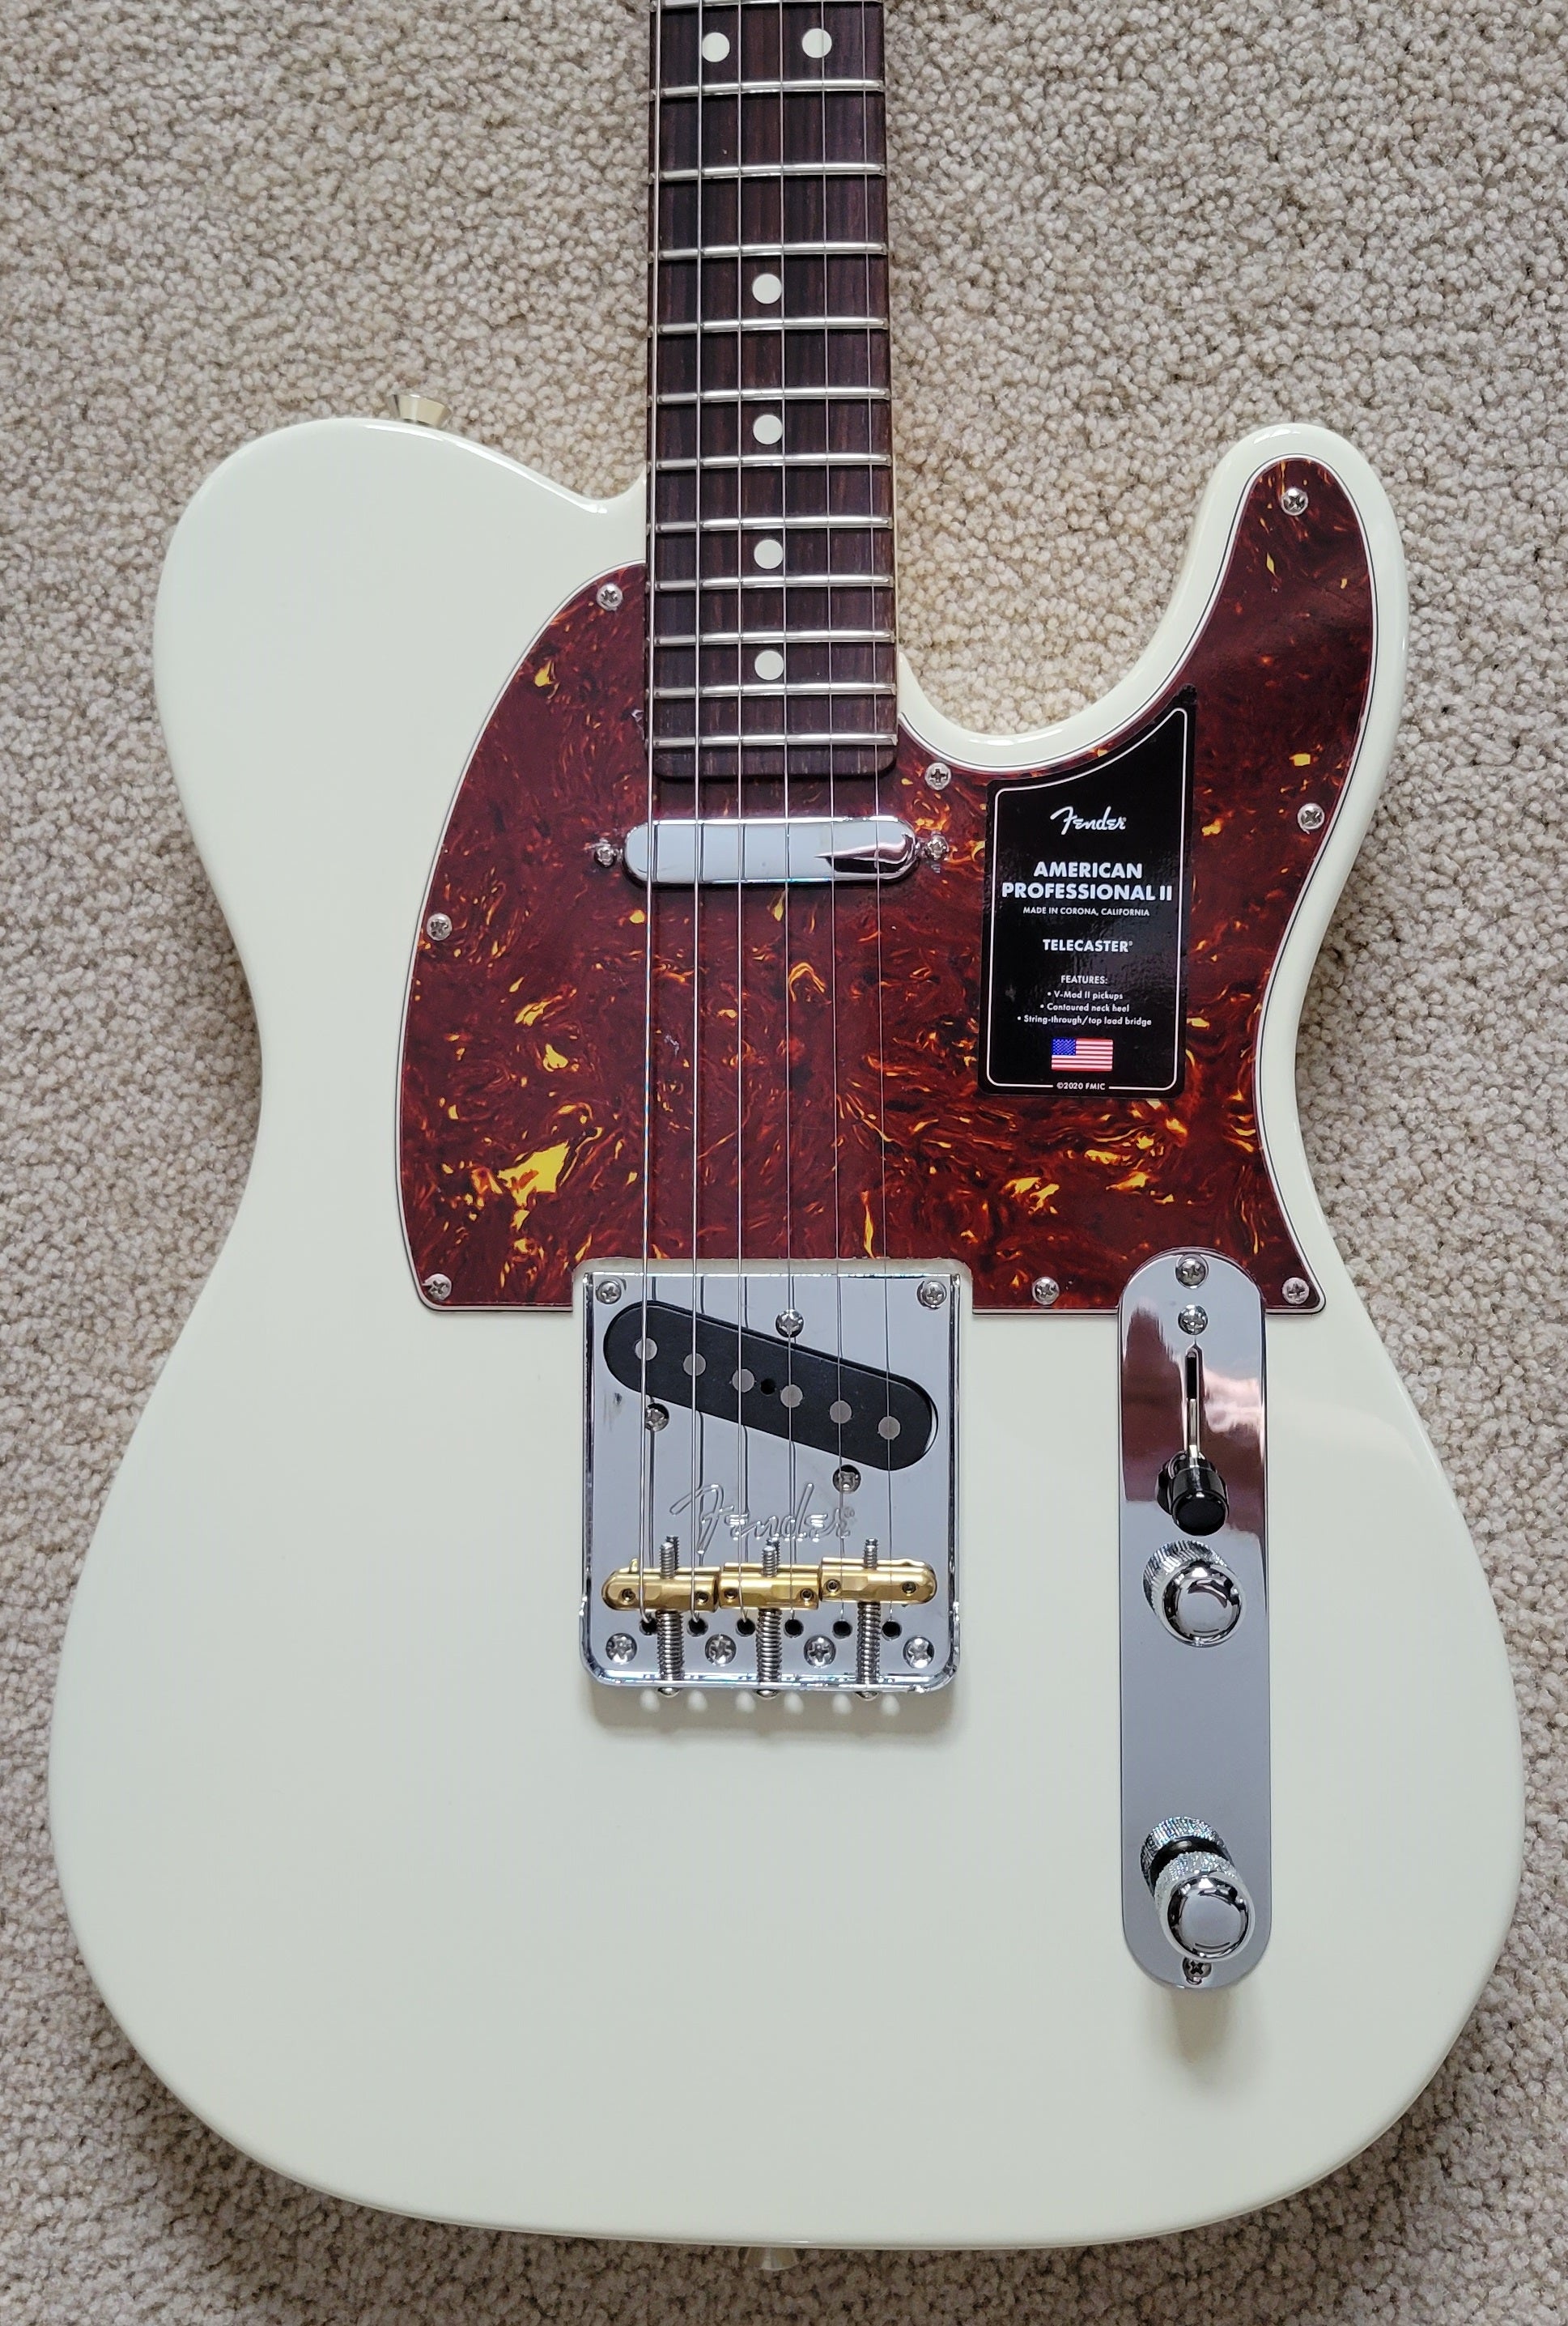 Fender American Professional II Telecaster Electric Guitar, Olympic 